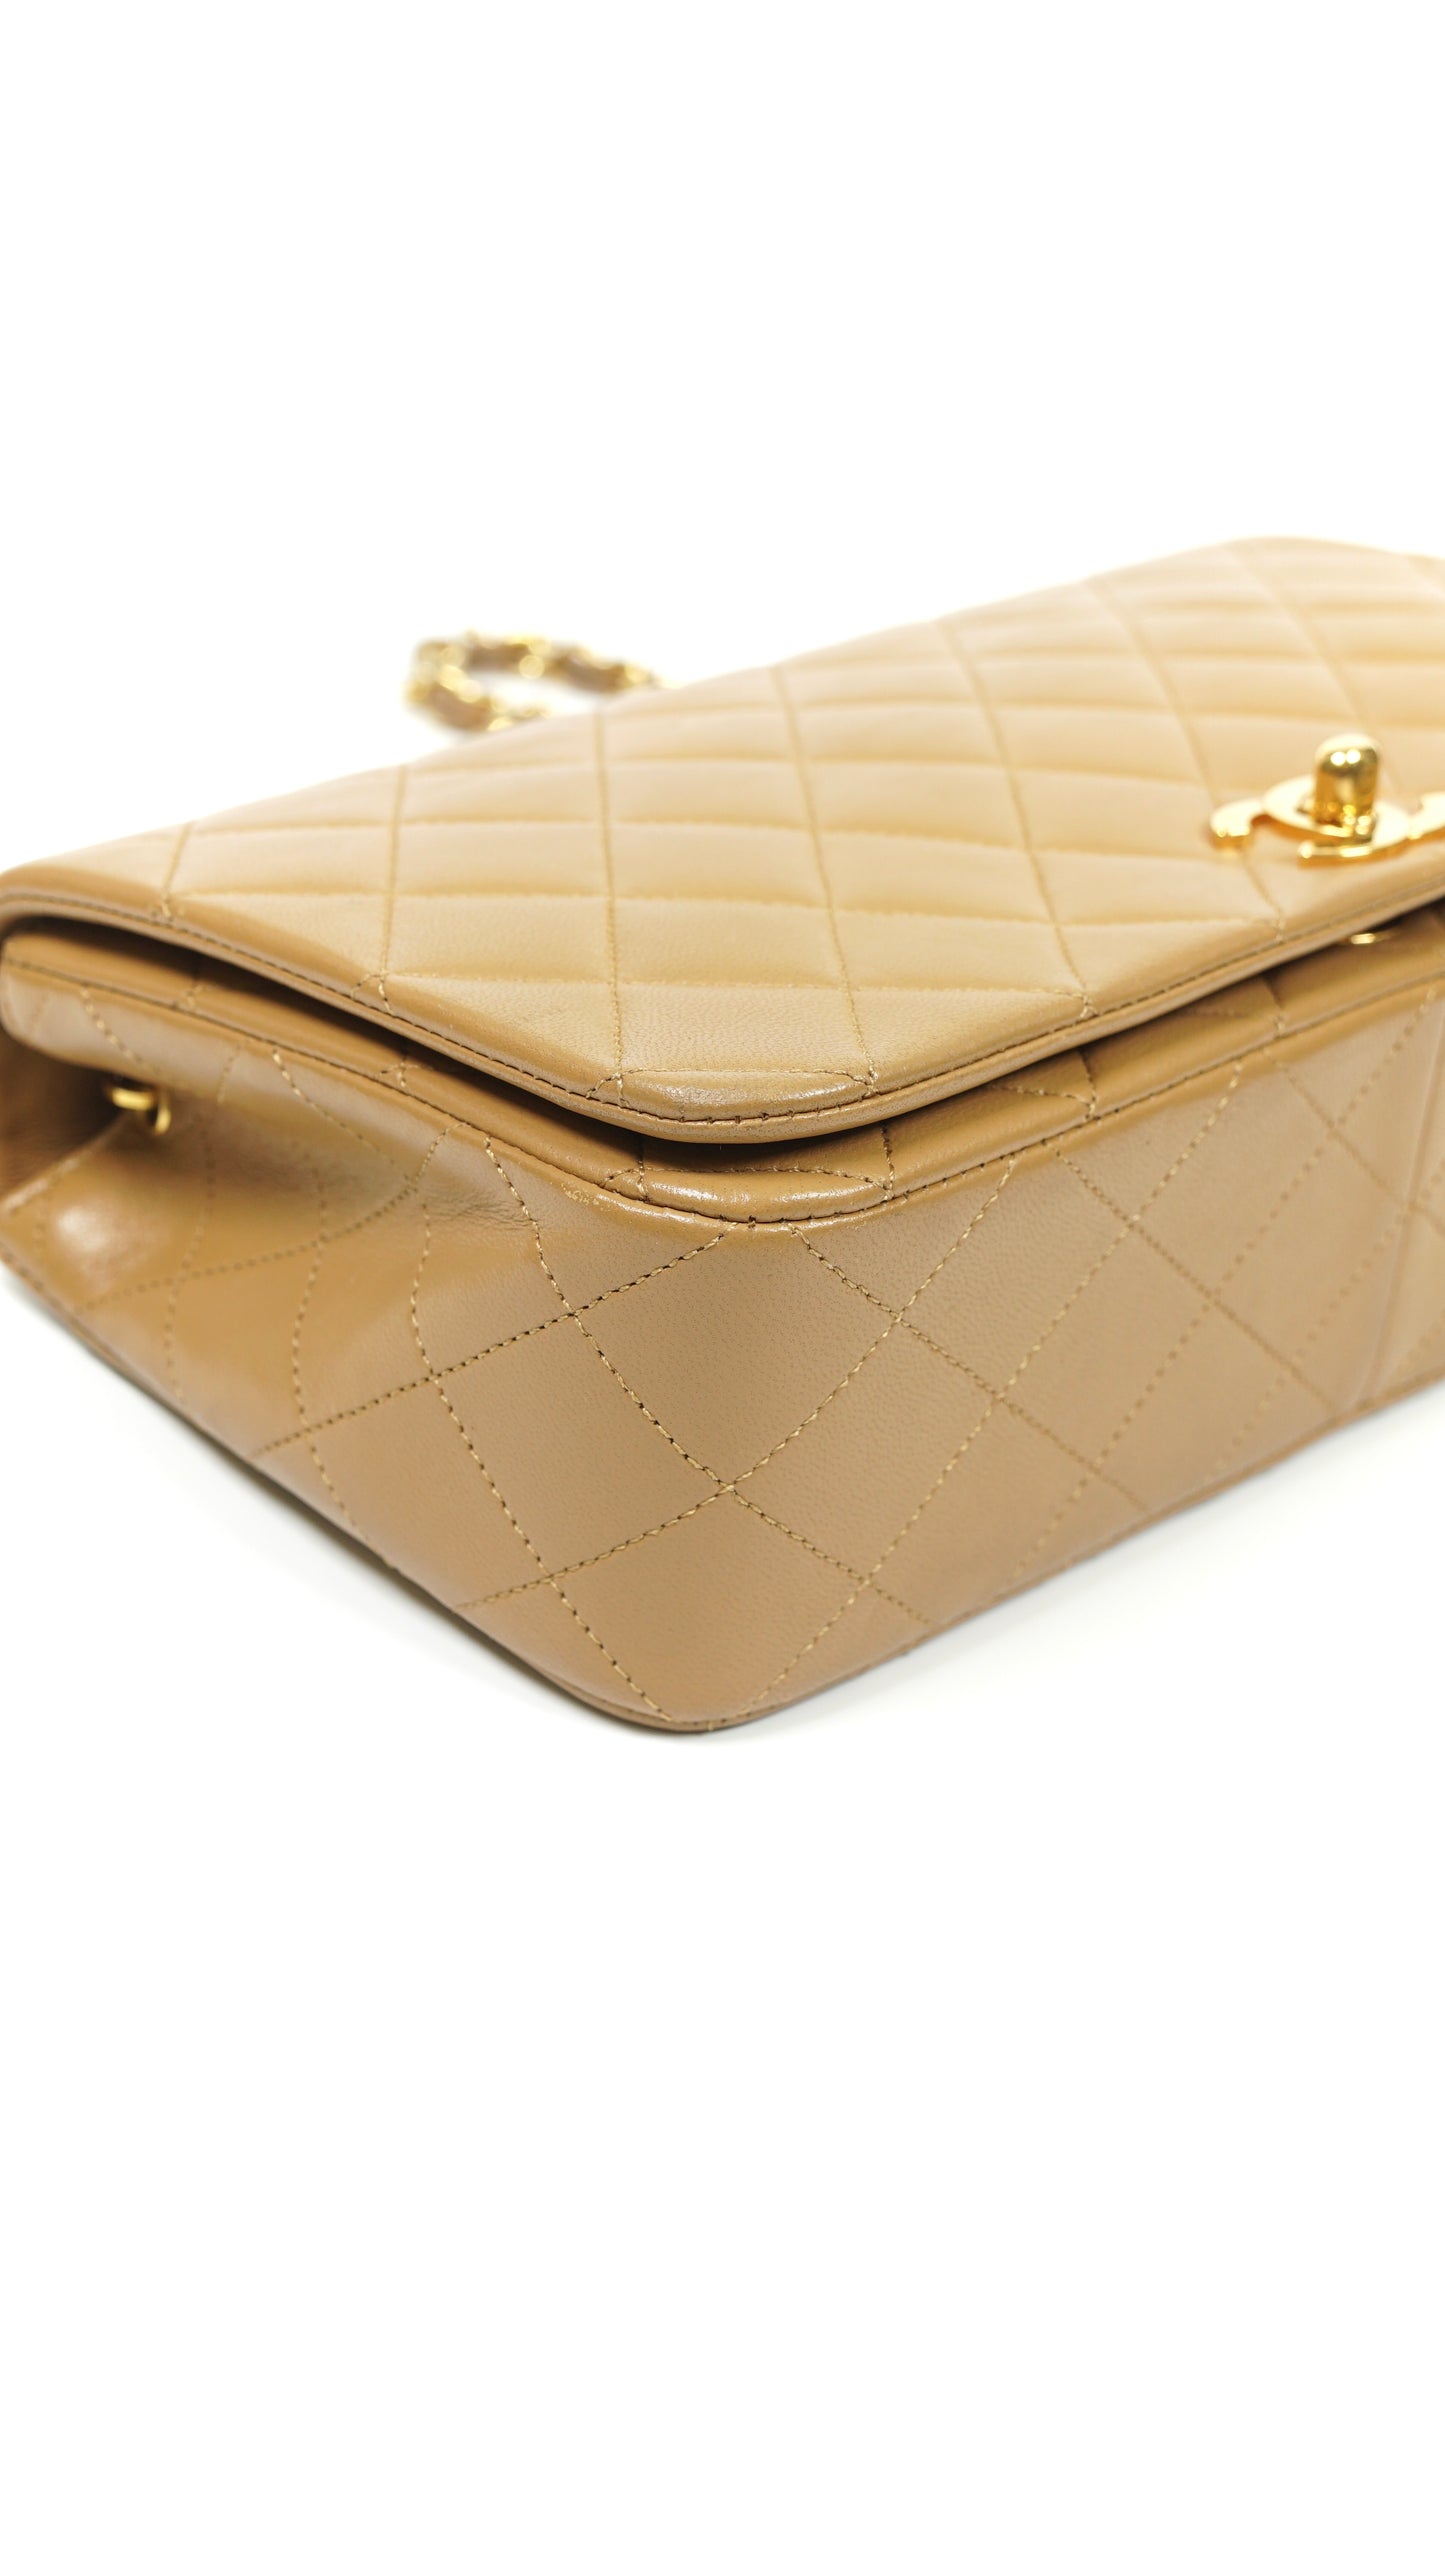 Stanislaw, 1 series 23cm full flap yellow caramel lambskin with seal and card